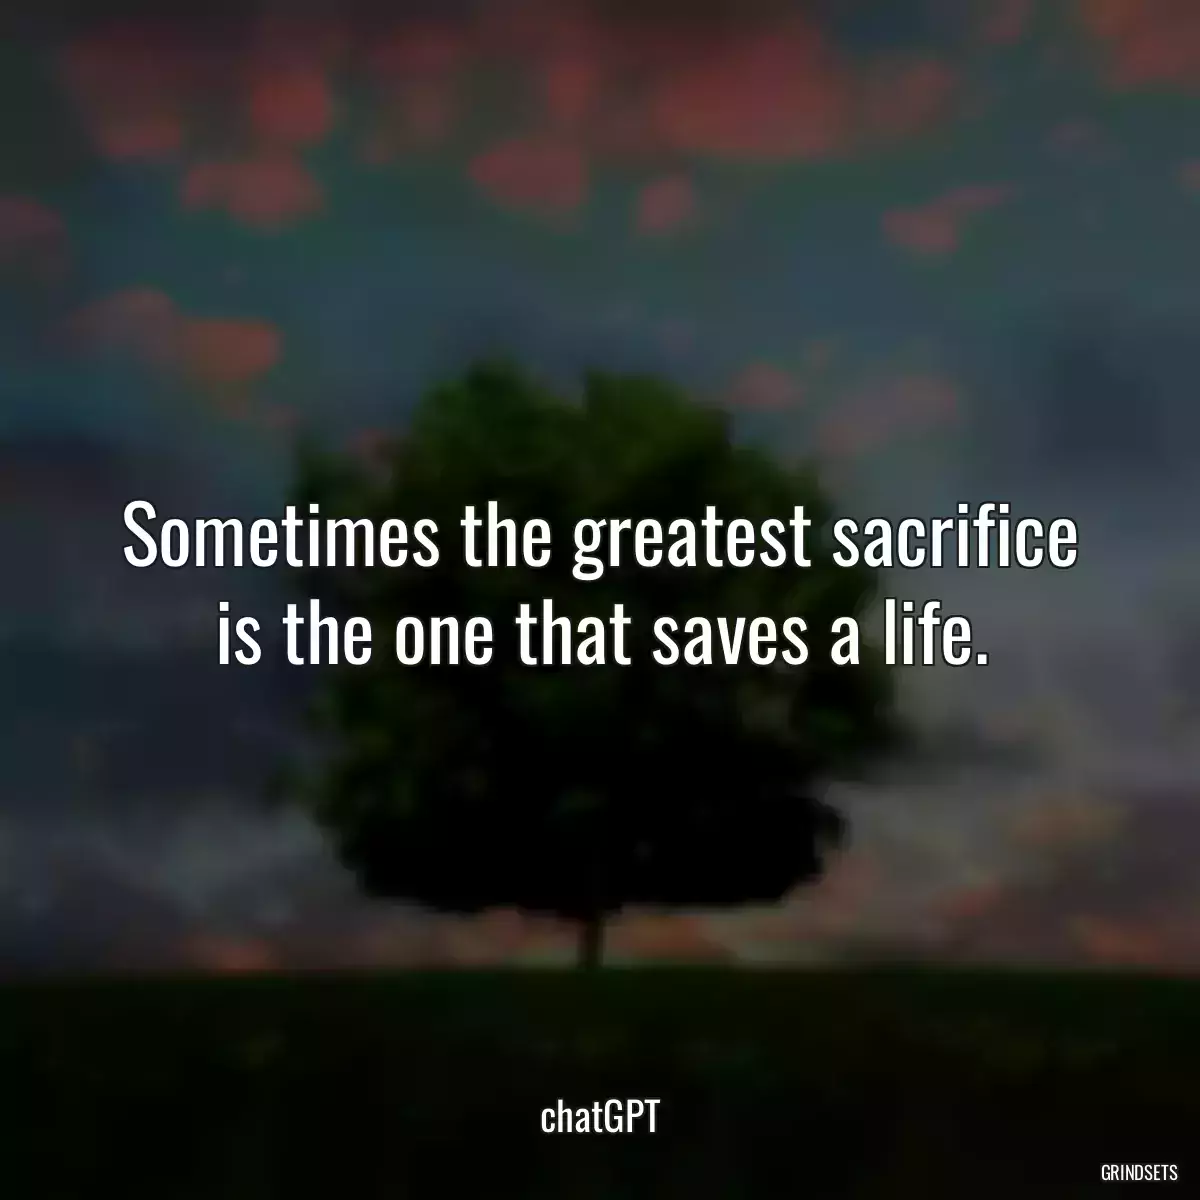 Sometimes the greatest sacrifice is the one that saves a life.